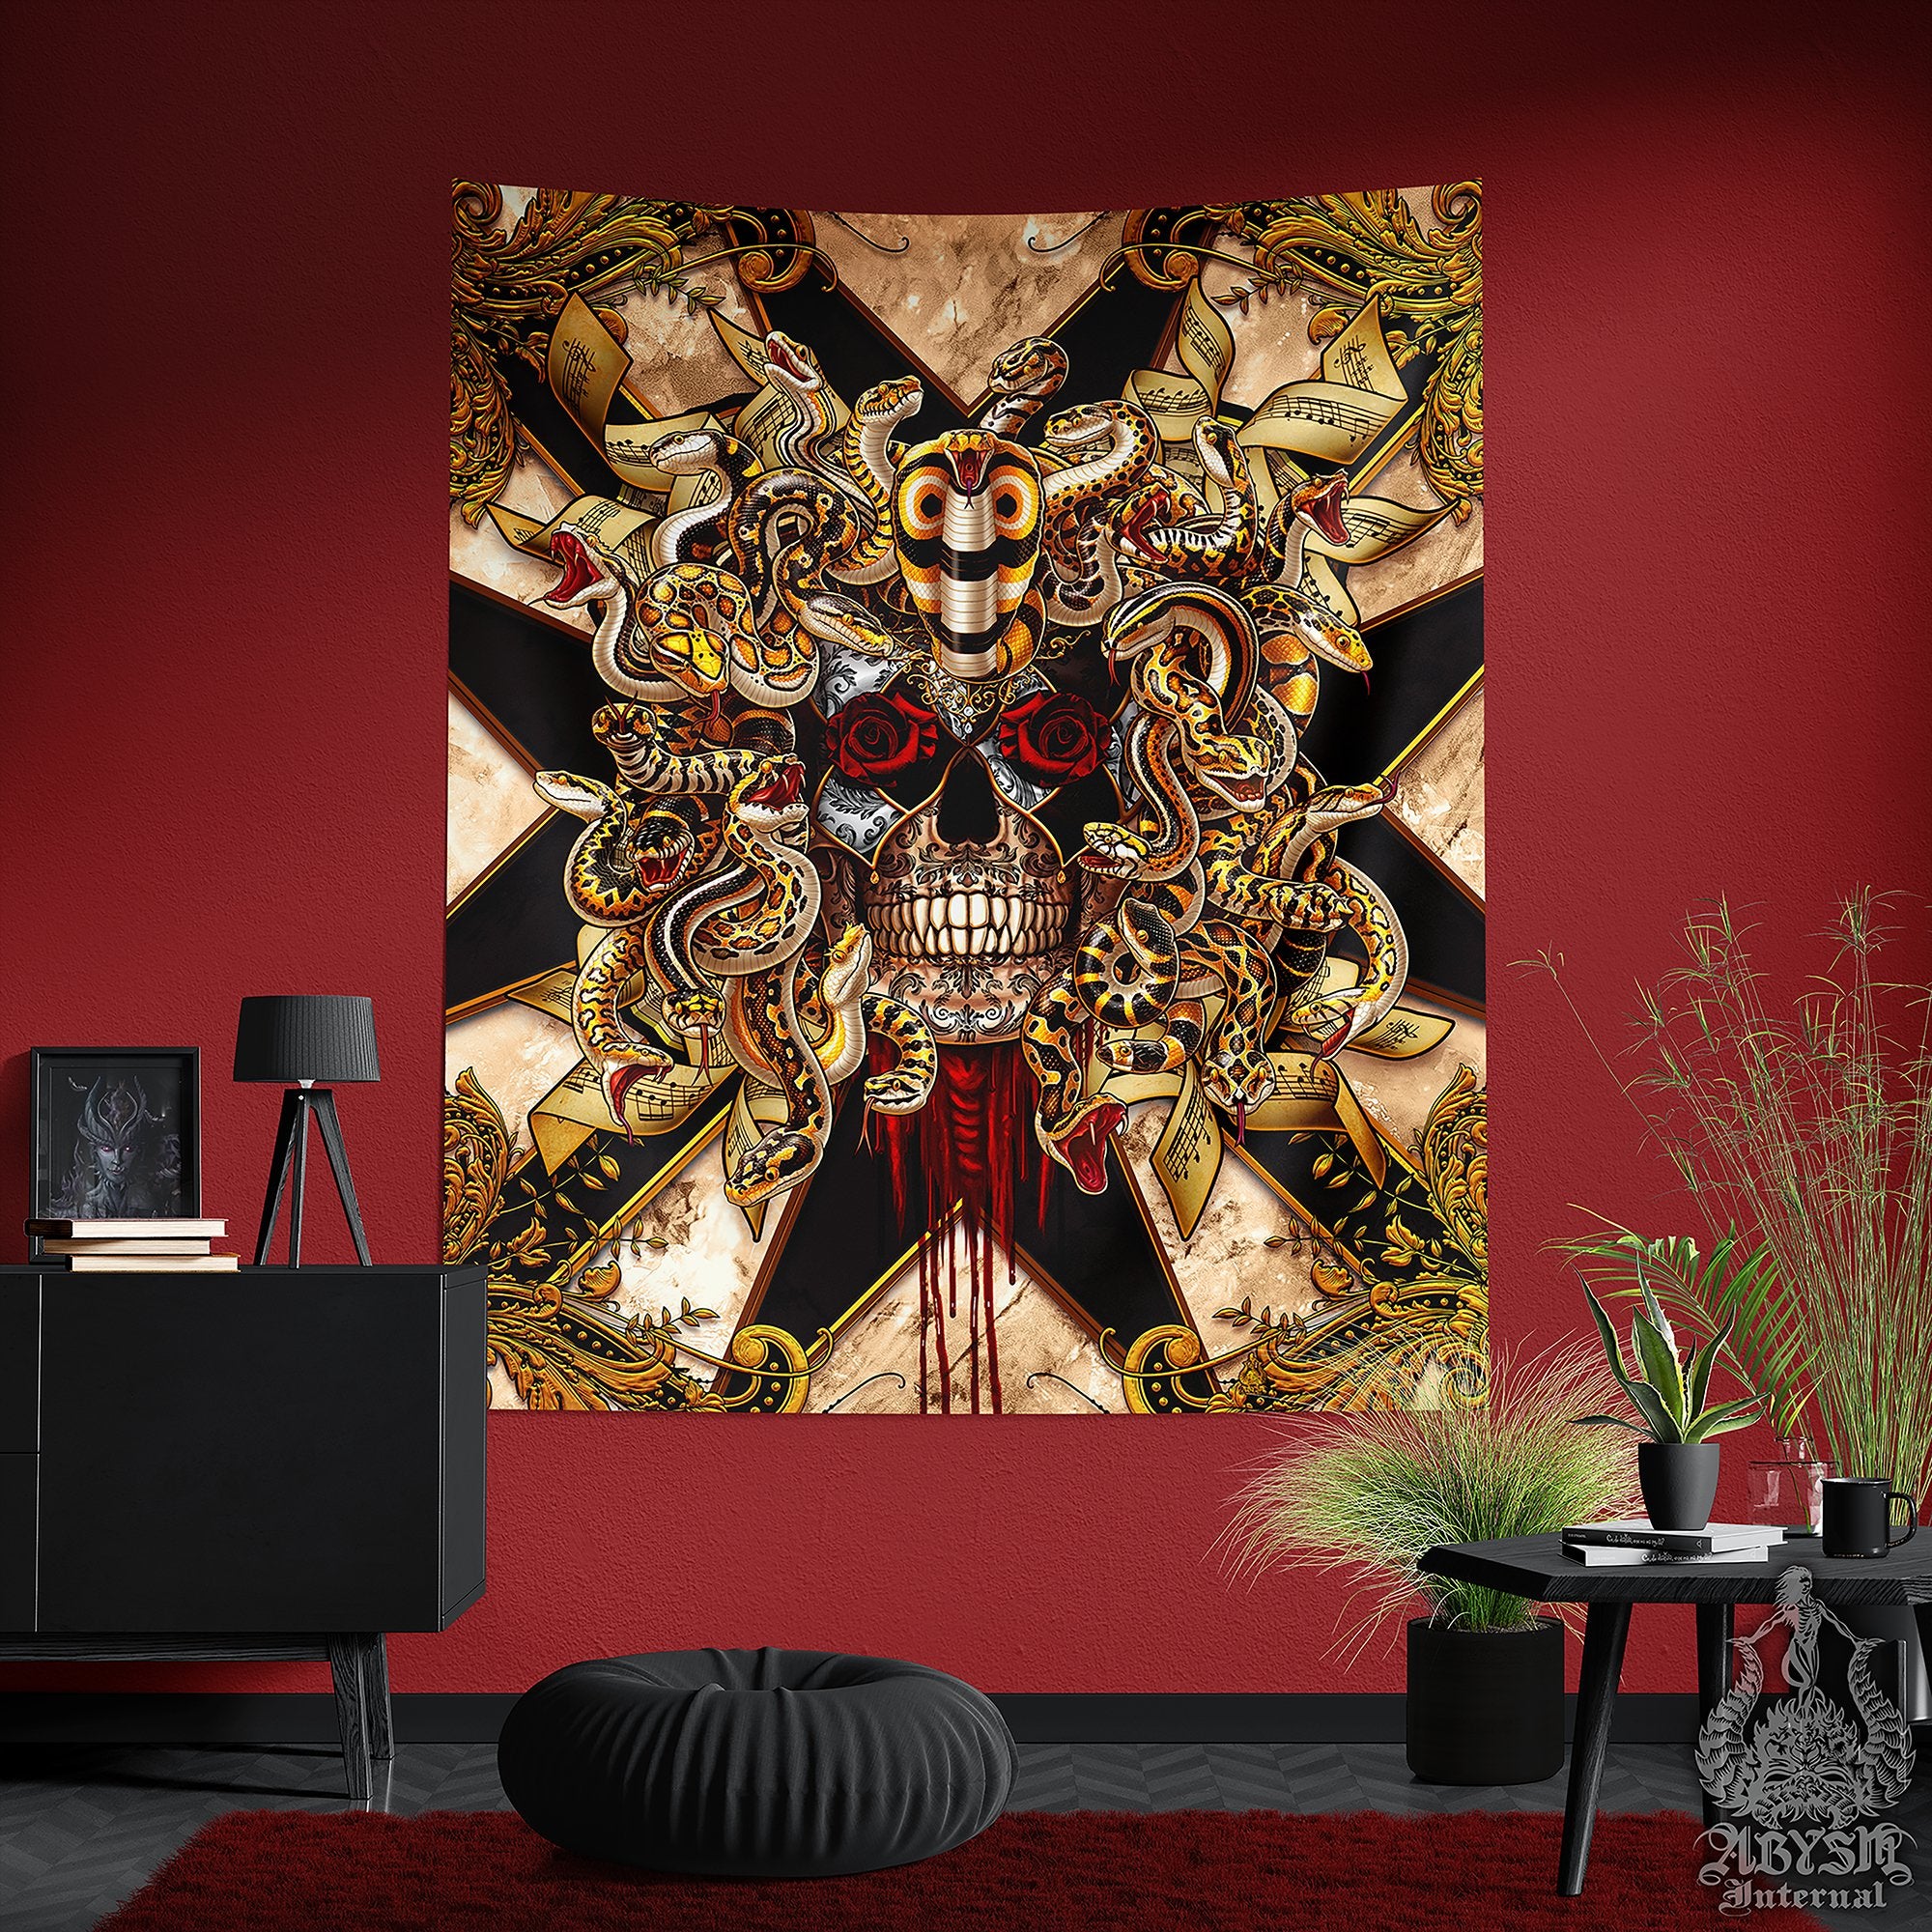 Medusa Tapestry, Venice Carnival Wall Hanging, Eclectic Home Decor, Vertical Art Print - Pink Harlequin & Gold Snakes, 4 Faces, 7 Colors - Abysm Internal